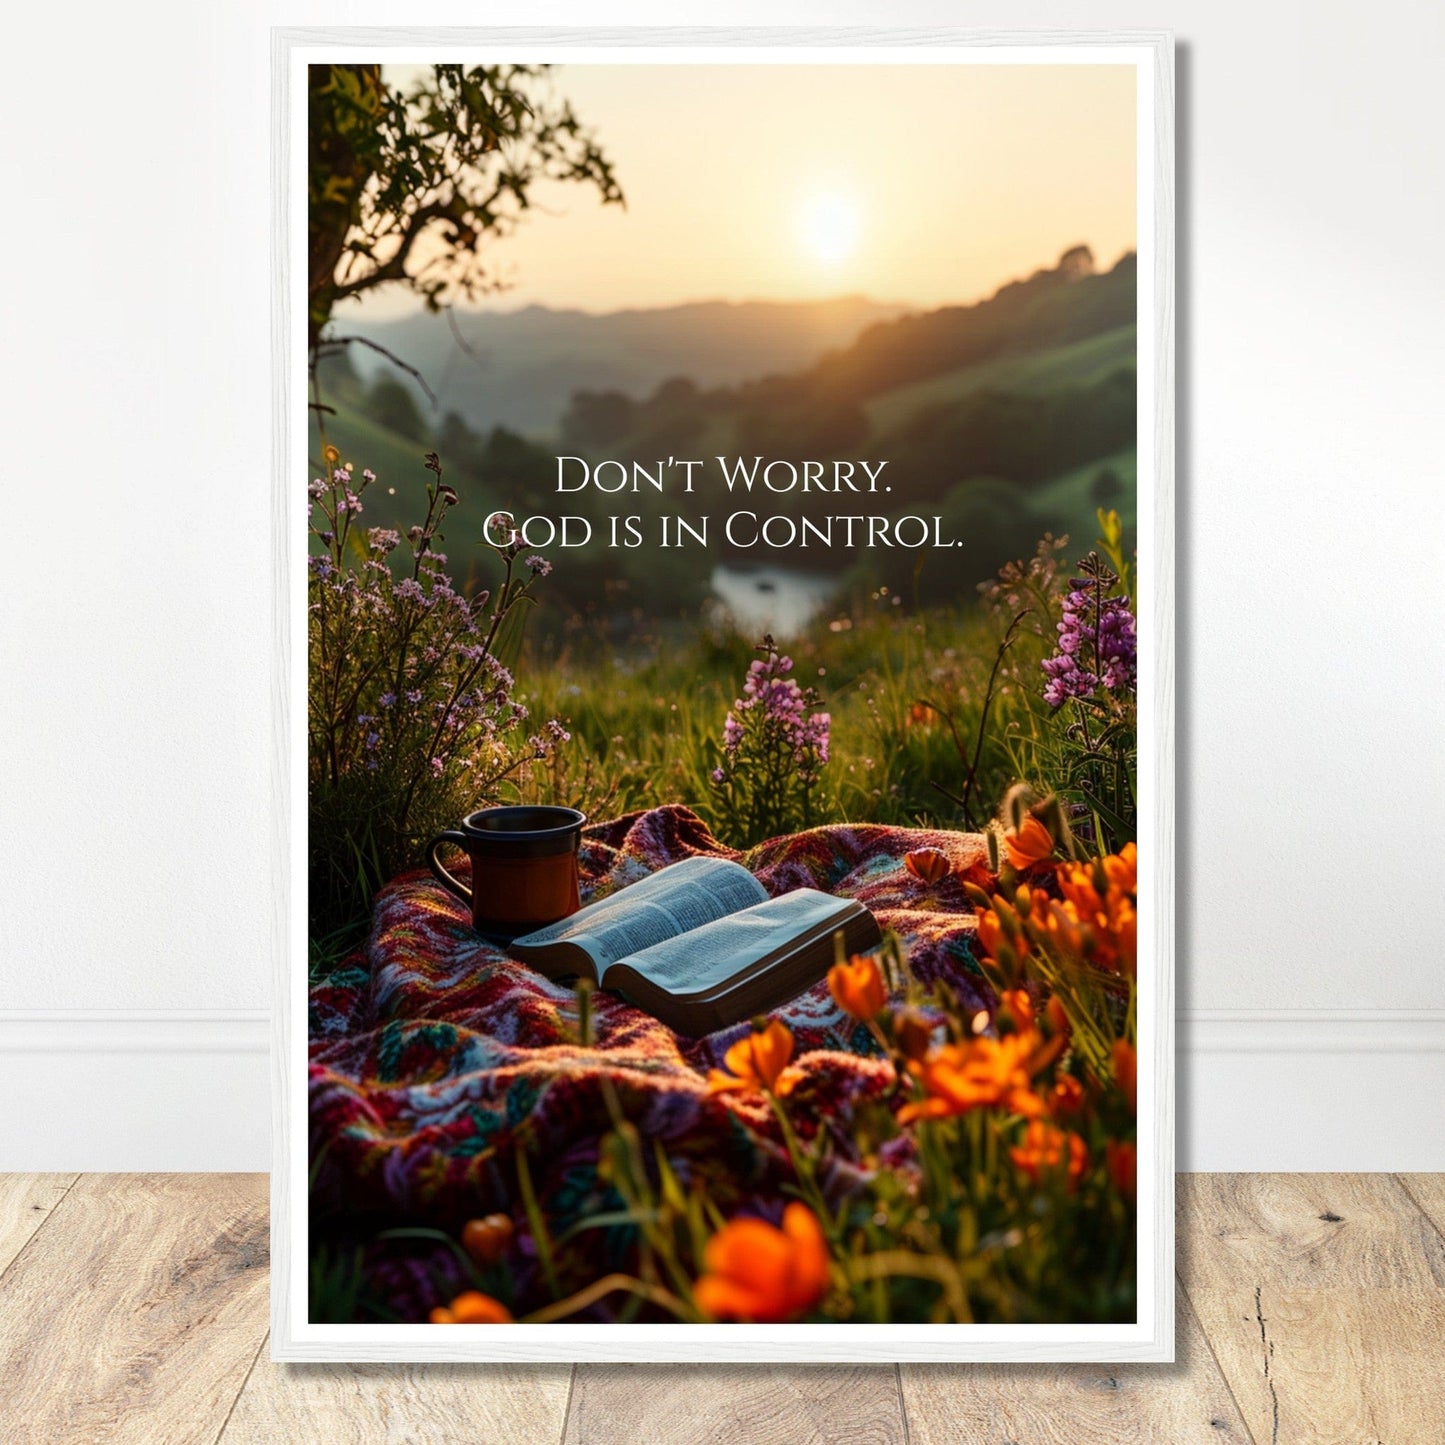 Coffee With My Father Print Material 60x90 cm / 24x36″ / White frame Premium Matte Paper Wooden Framed Poster